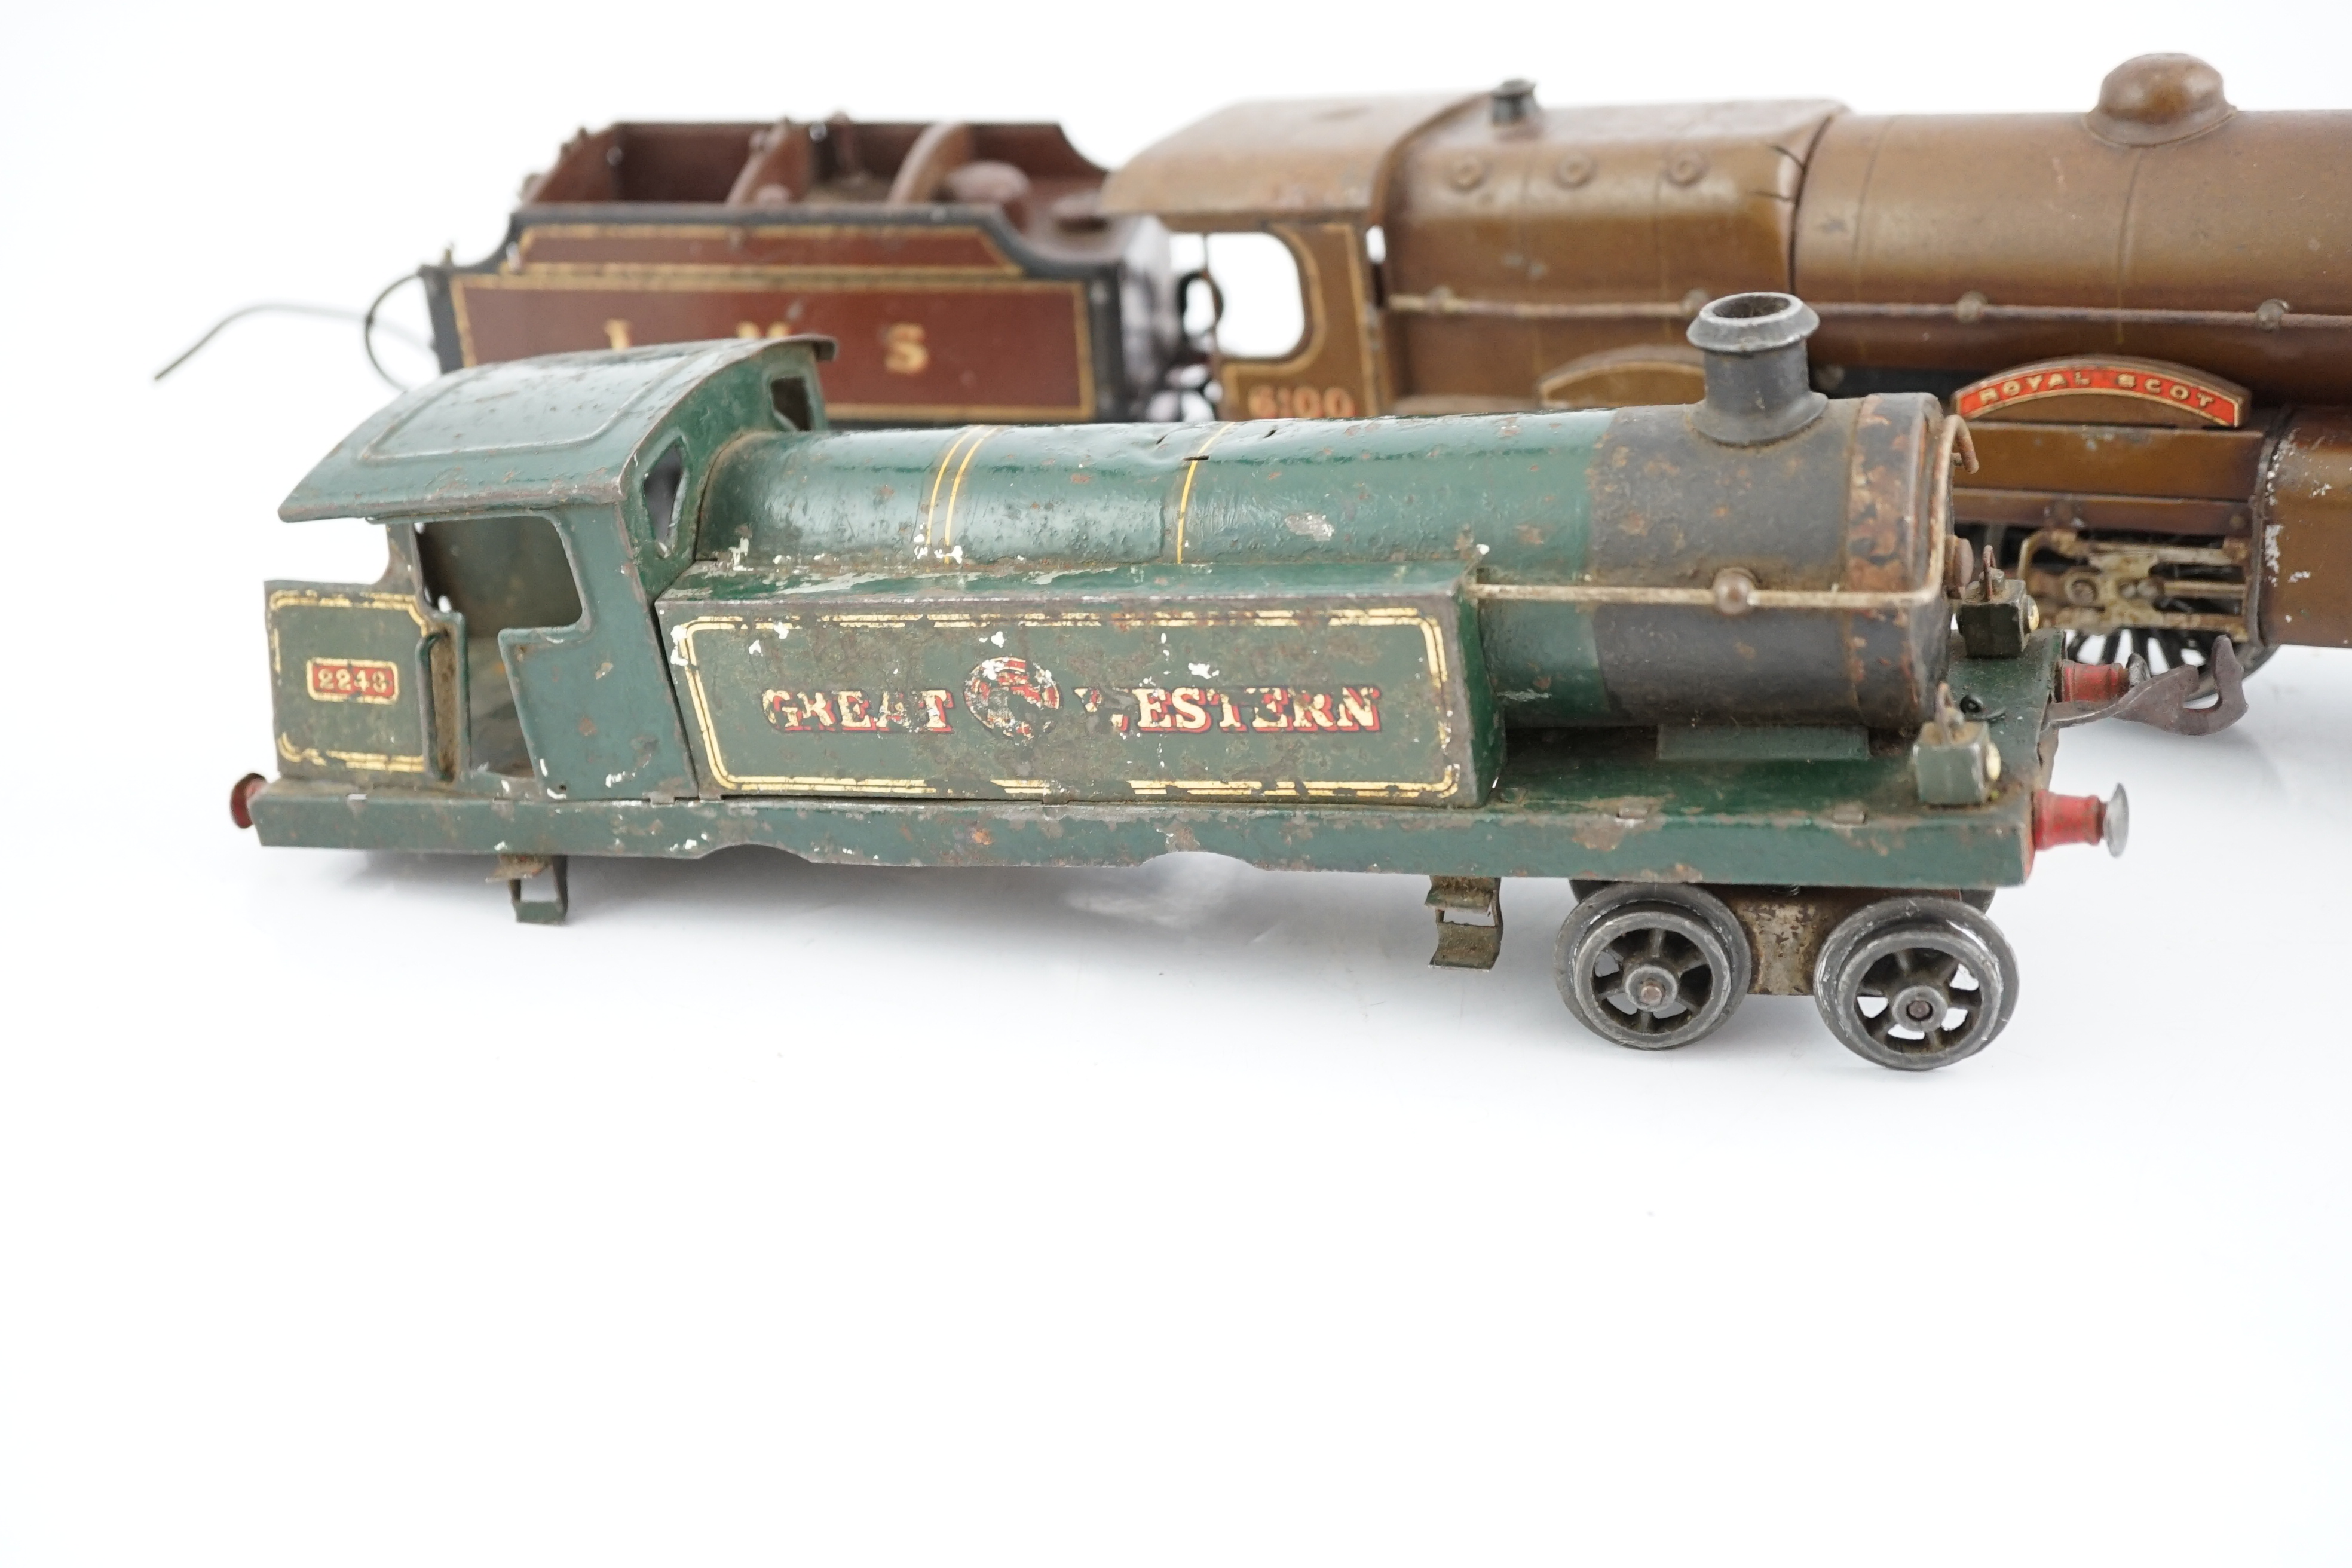 Two Hornby Series 0 gauge tinplate locomotives for 3-rail running; an LMS 4-4-2, Royal Scot 6100, and a Great Western 4-4-4T, 2243 (a.f.)